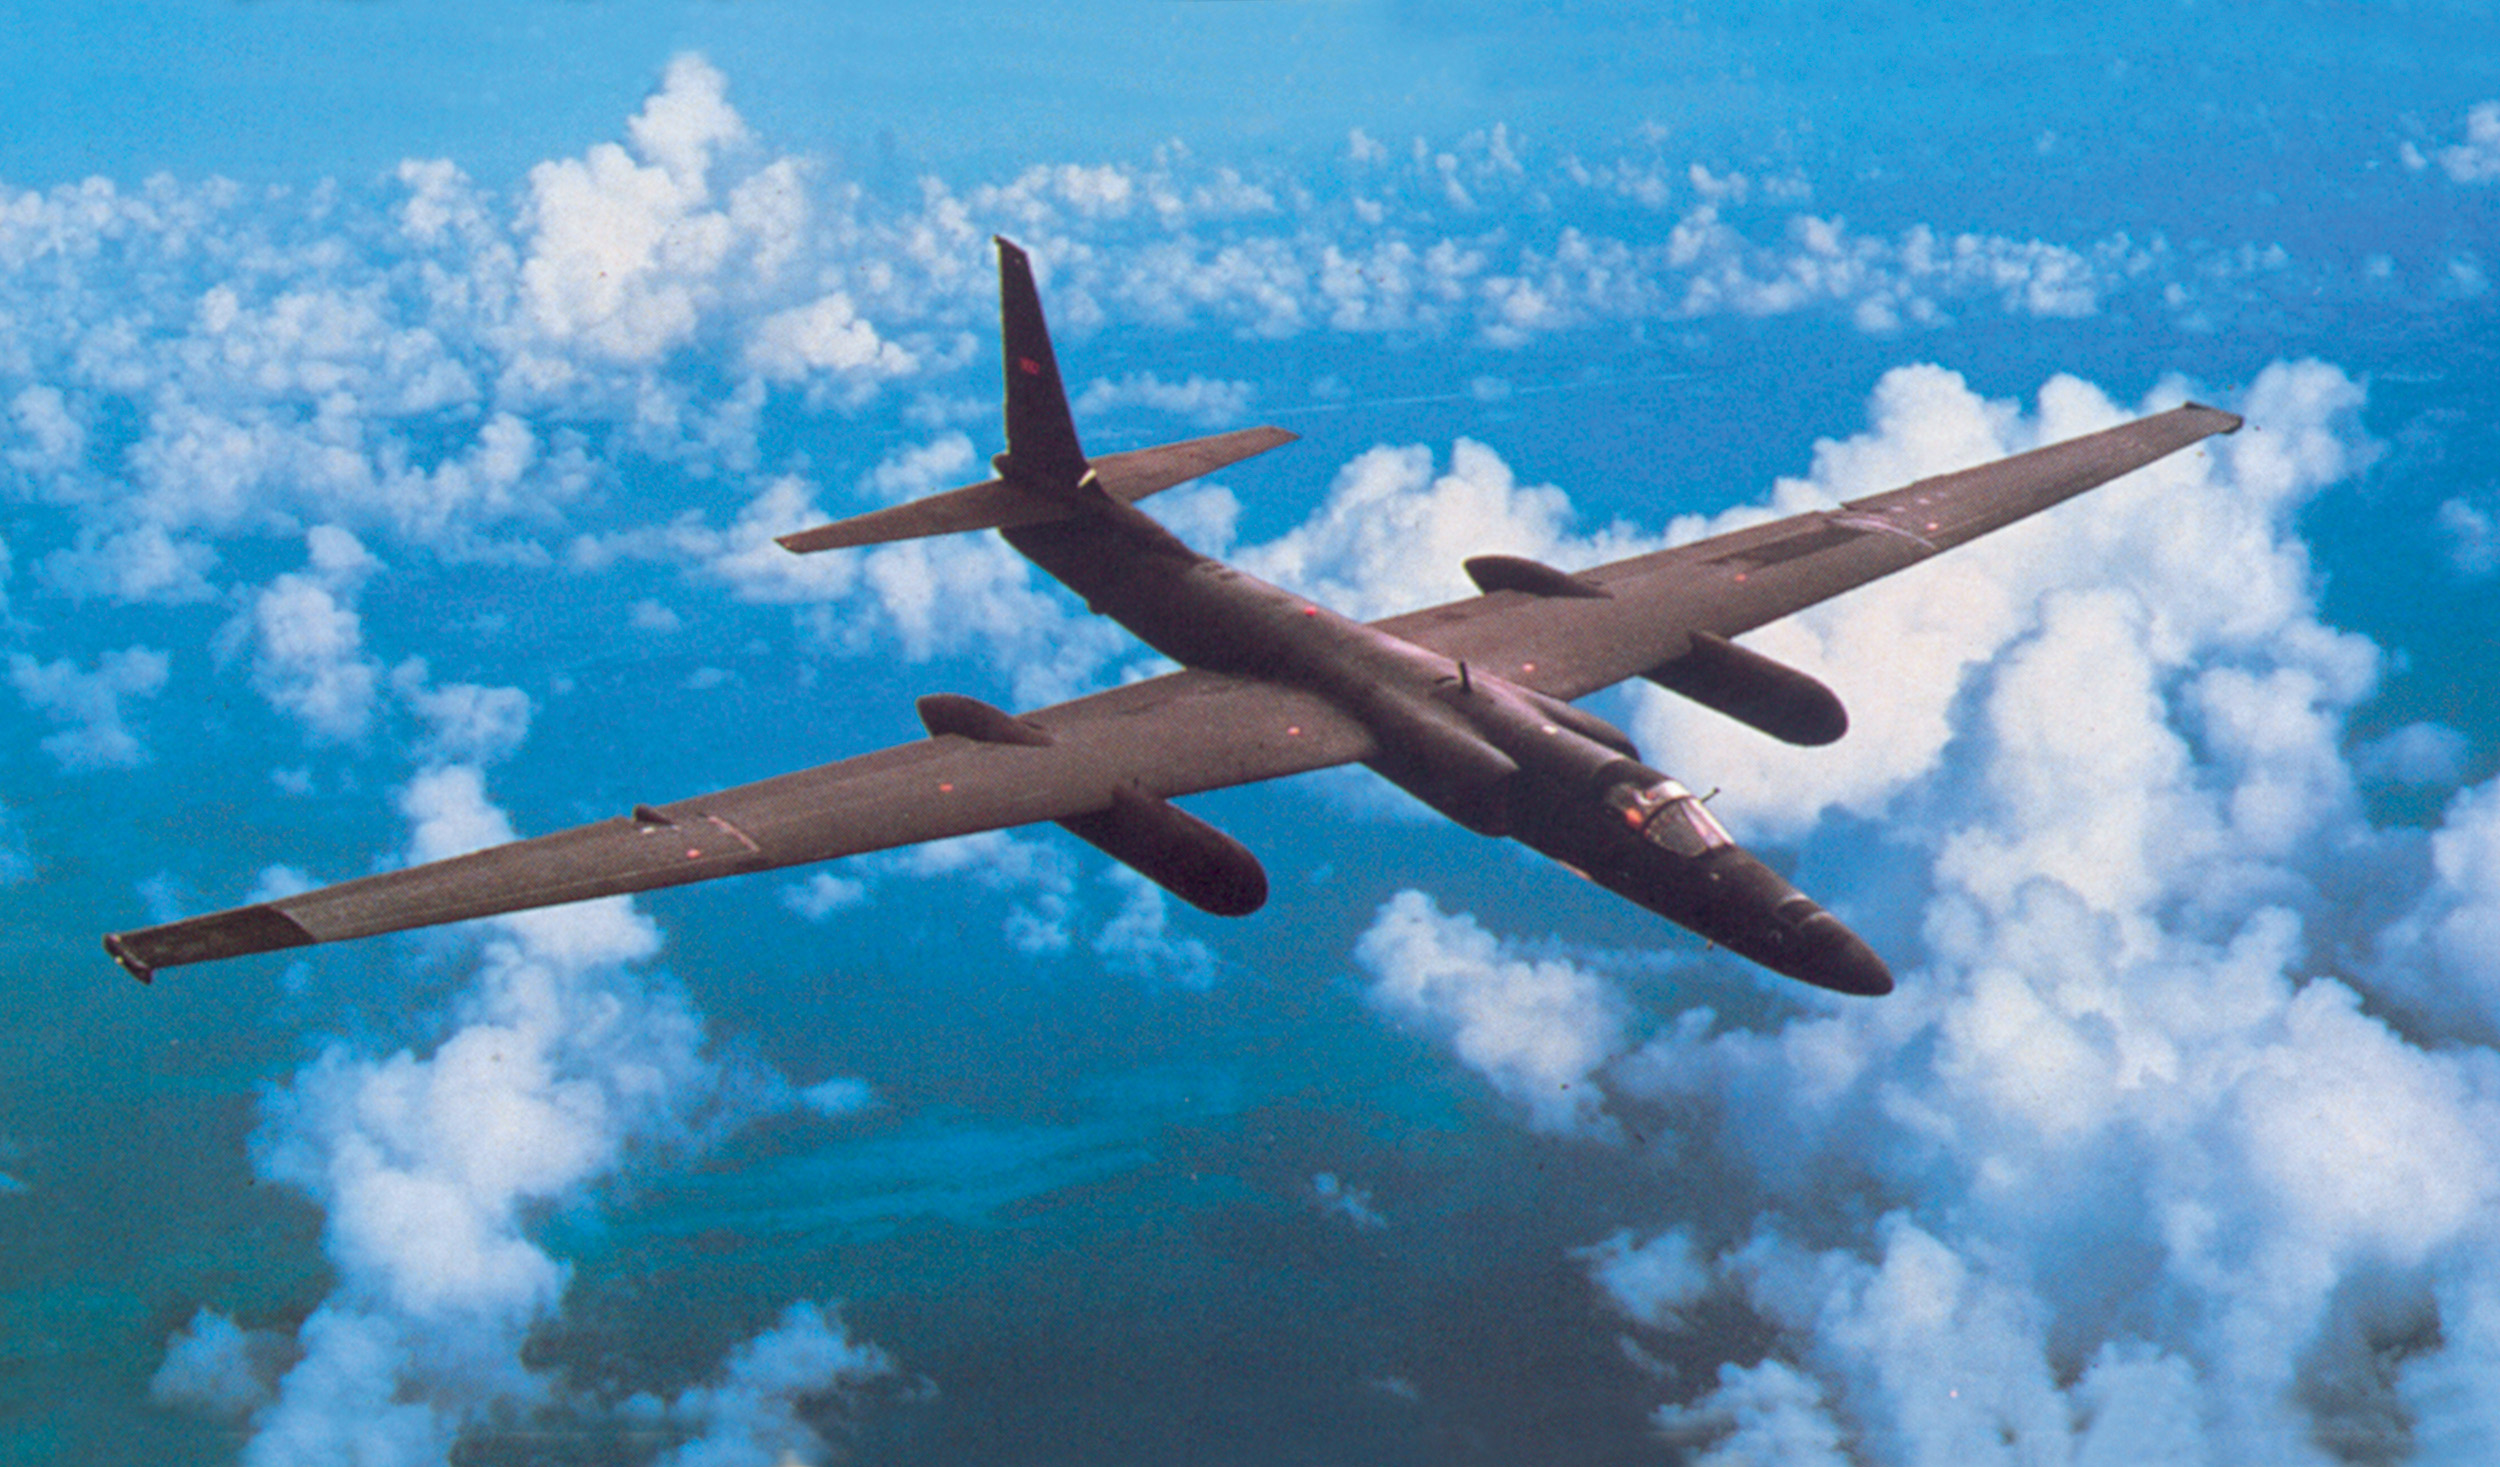 U-2 flights over the Soviet Union began in the mid-1950s. U-2s had extraordinary range and could fly 14 miles high while photographing in astonishing detail. A major objective: the extent of Soviet nuclear weaponry.